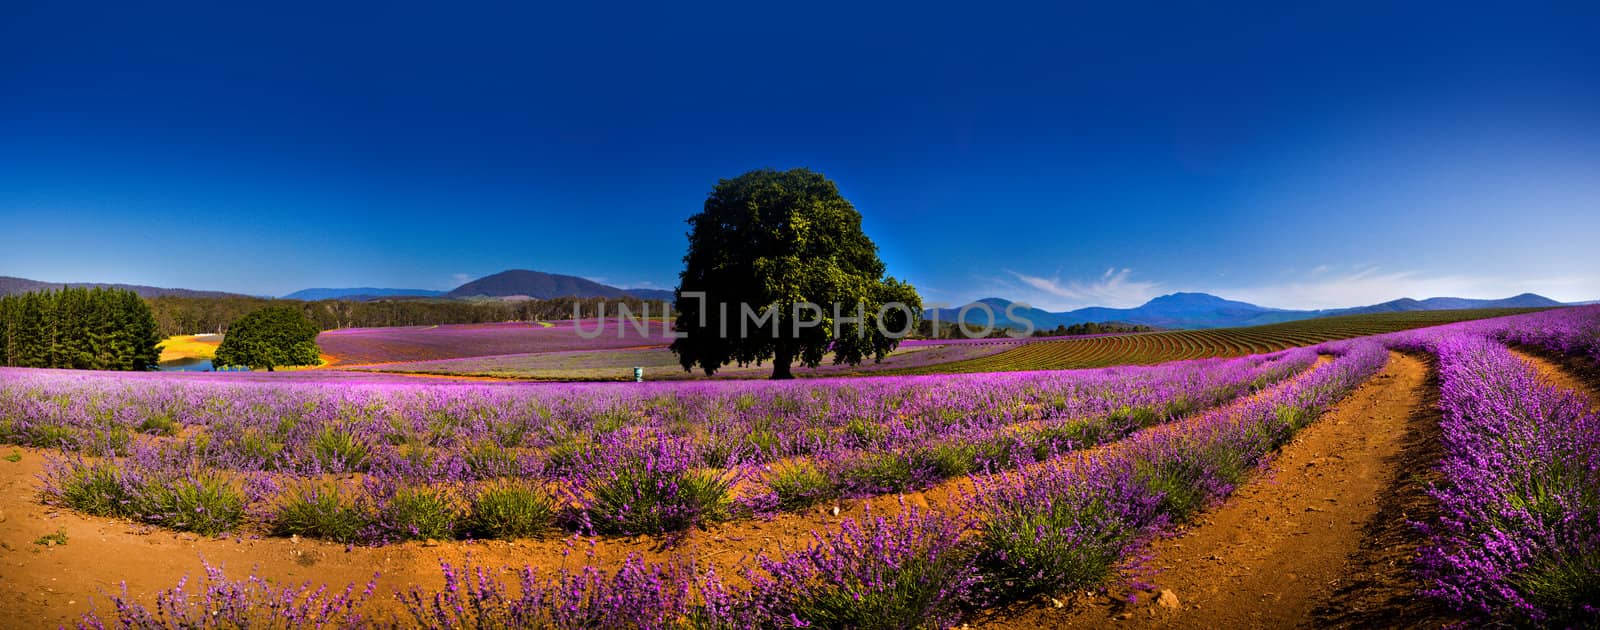 Rich purple lavender fields with rows of flowering plants and a single green tree in the centre against a distant backdrop of mountains